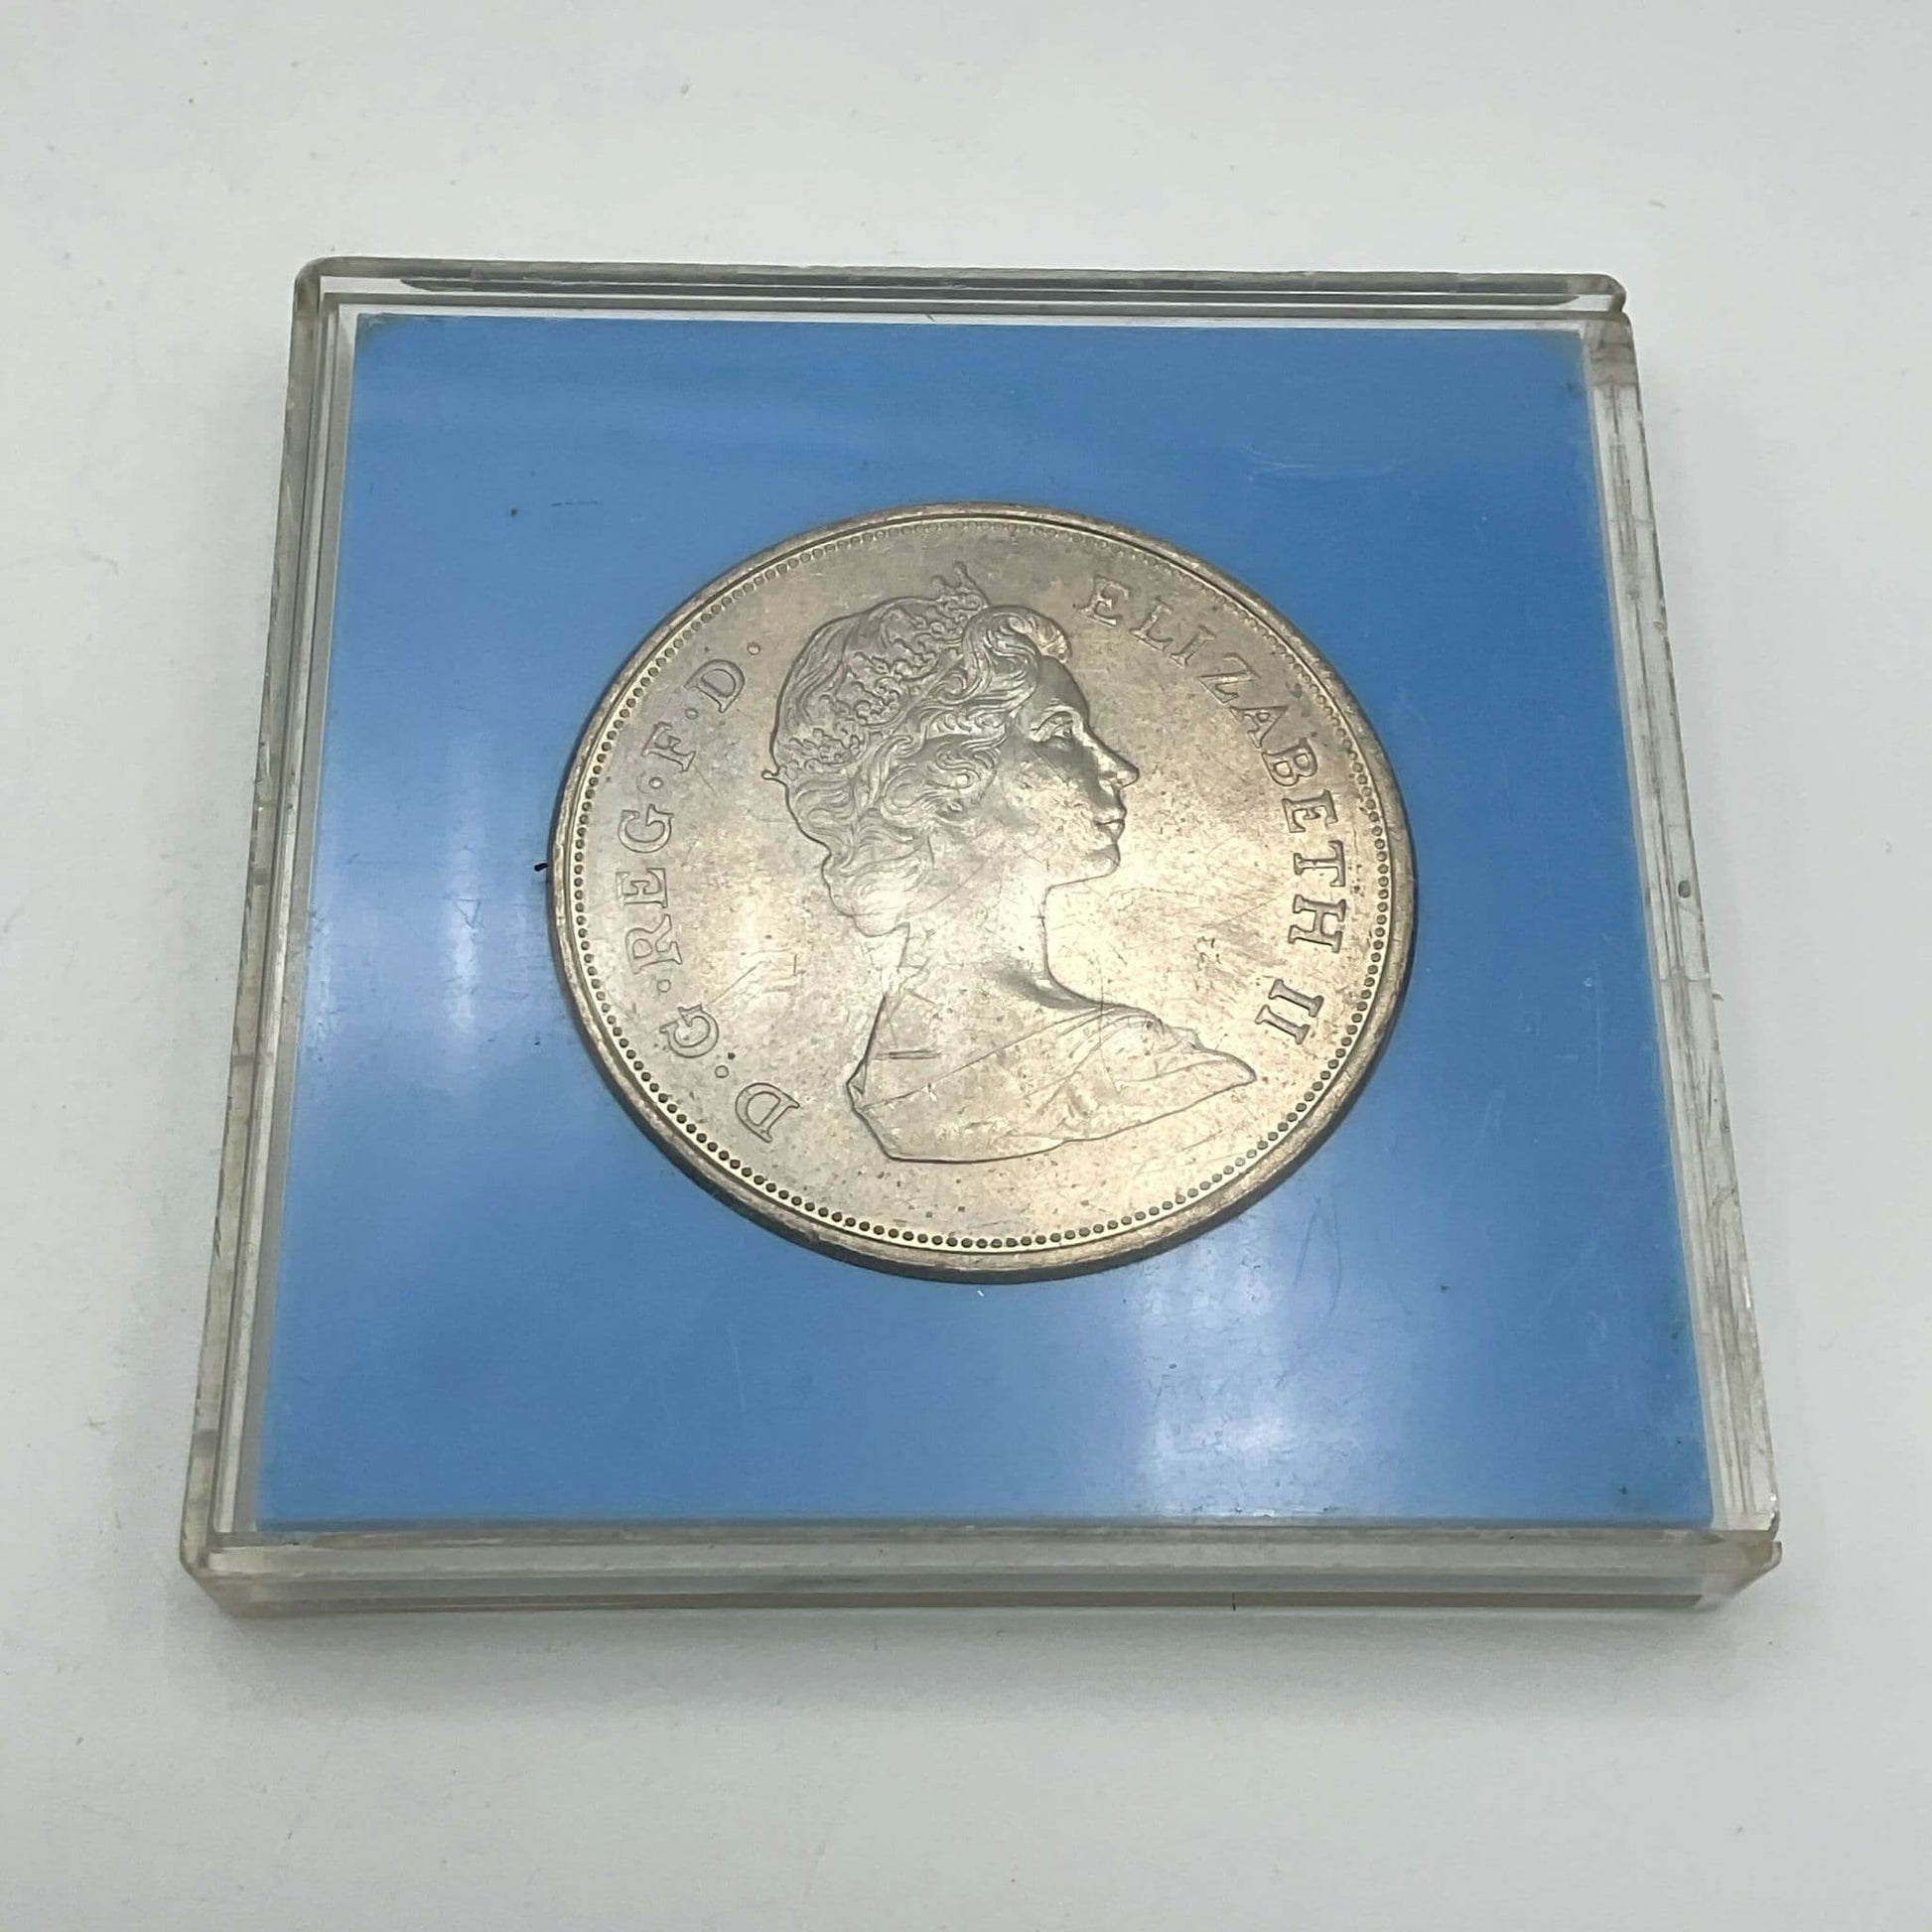 Reverse side of Silver coin featuring the Queen Mother's head in a light blue case